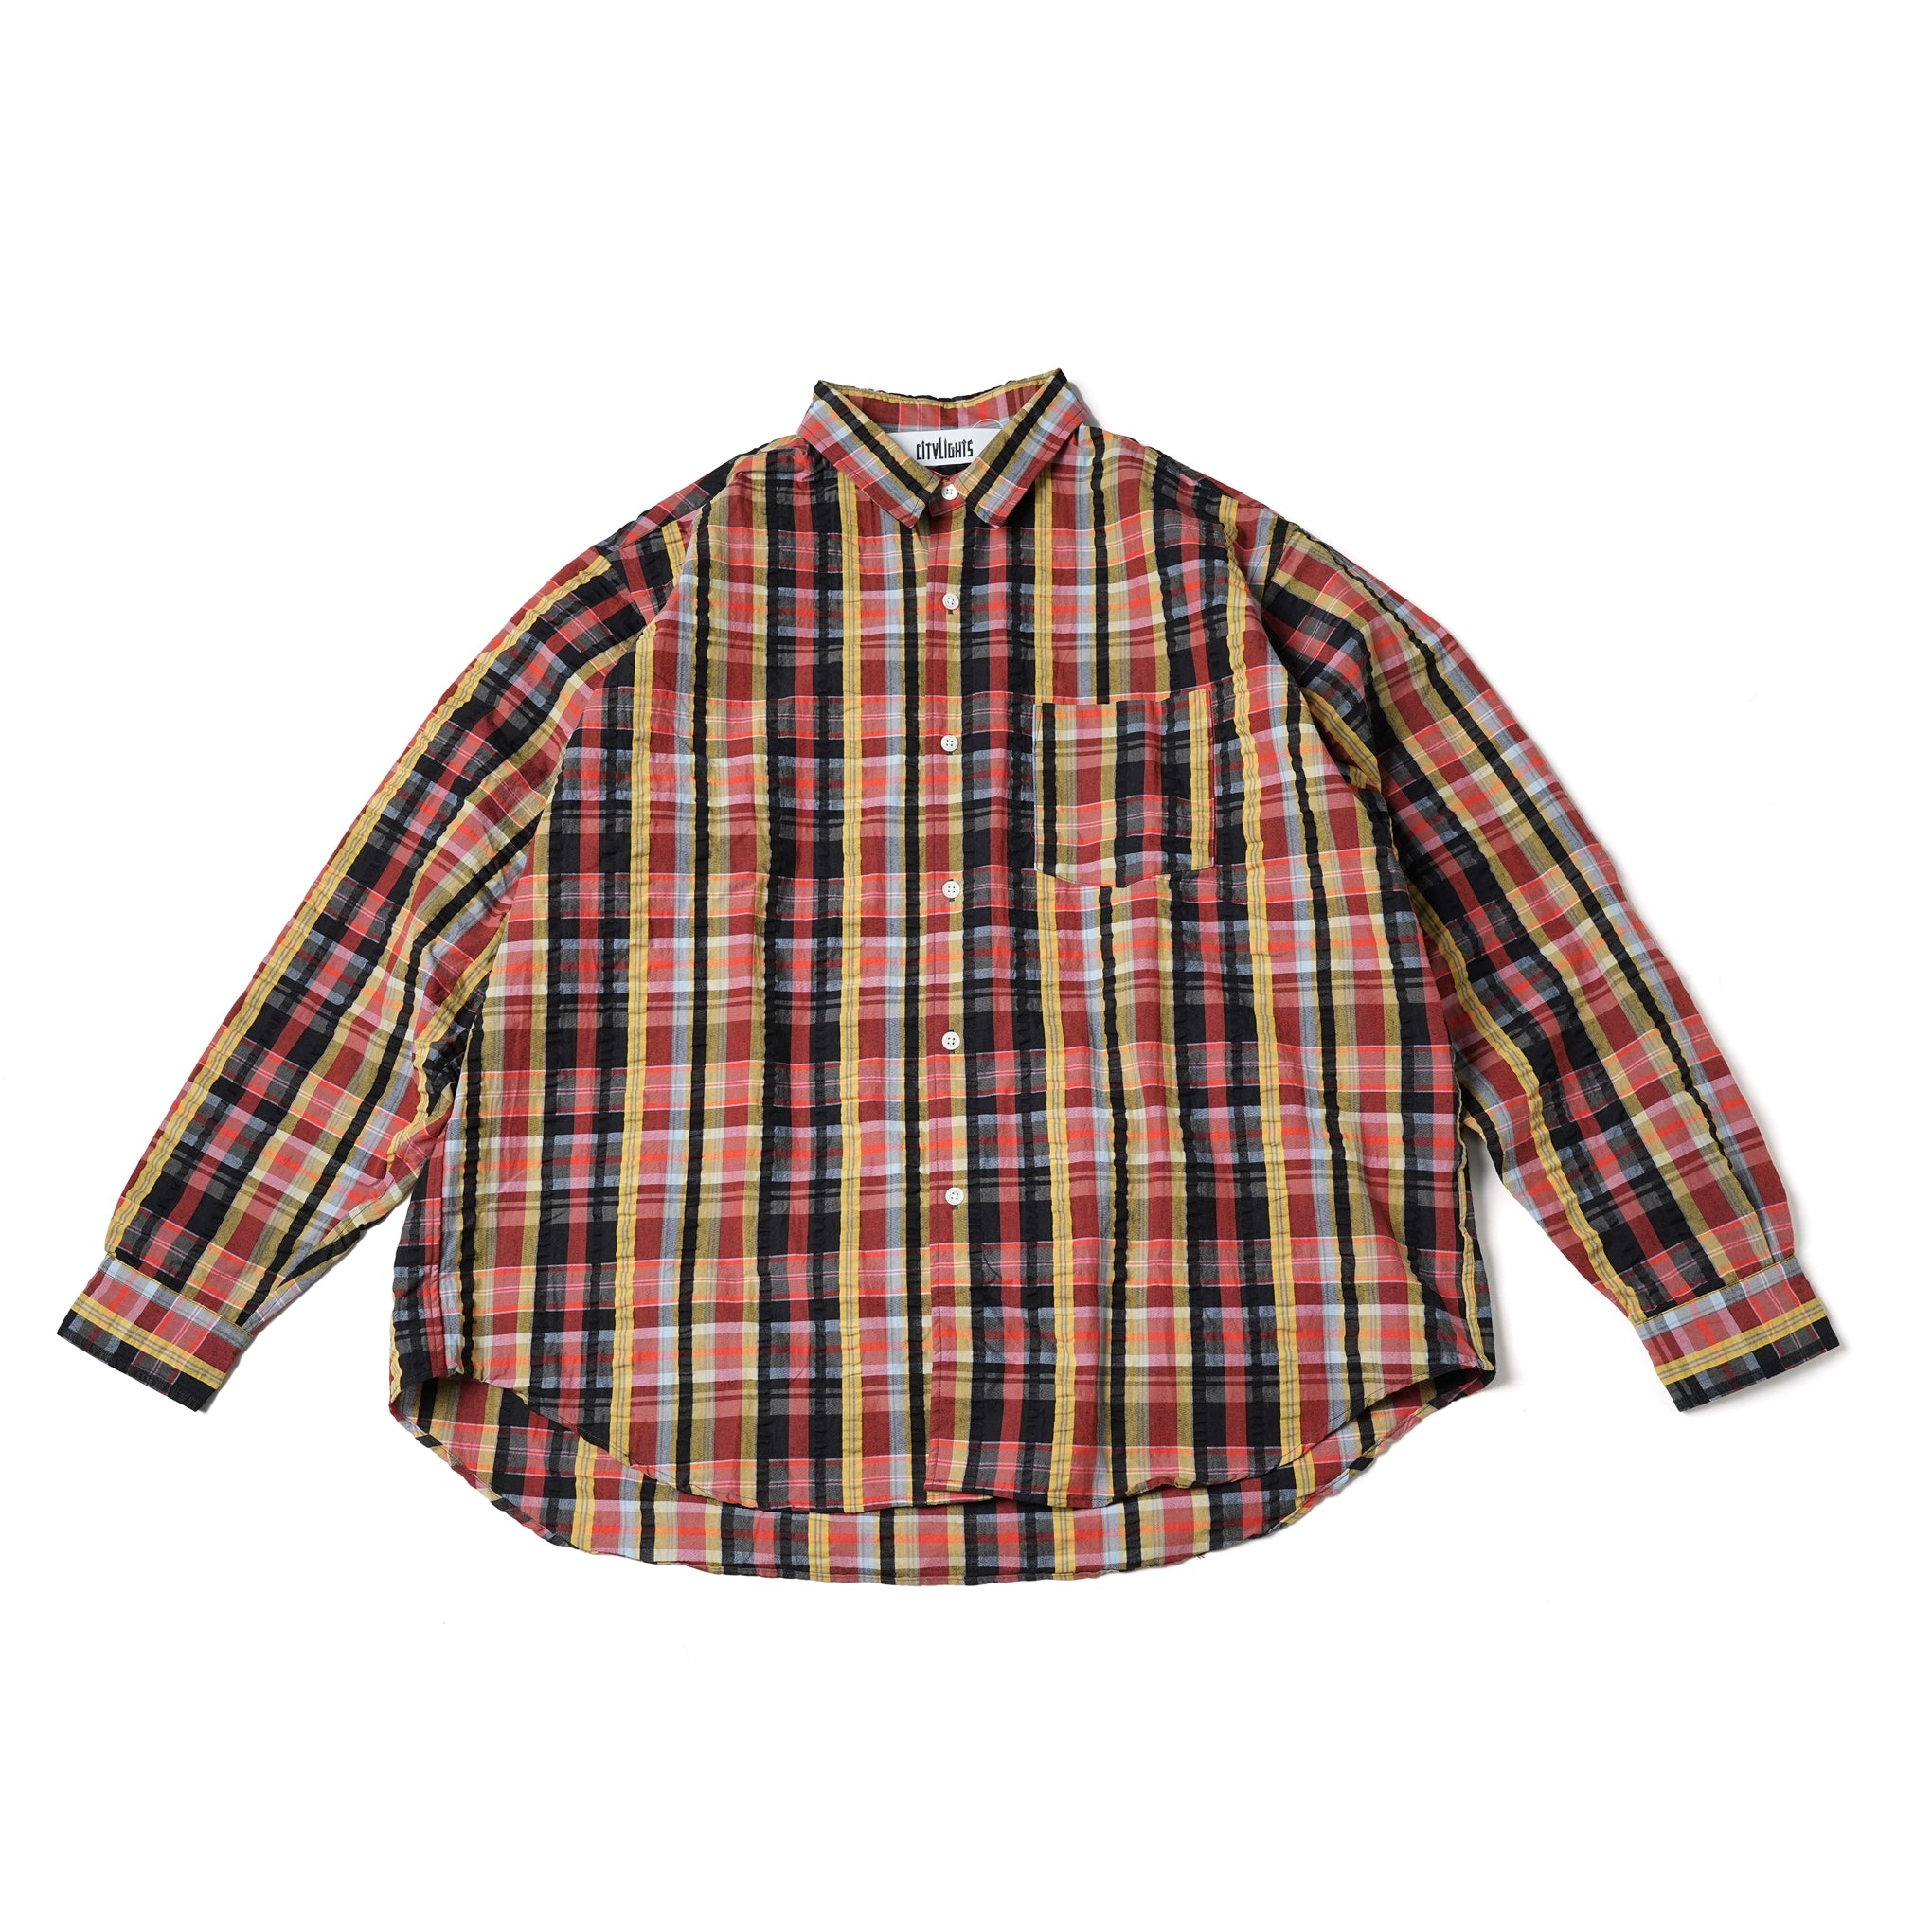 Name:OG REG SHIRTS | Color:Madrascheck | Size:Regular/Tall 【CITYLIGHTS PRODUCTS_シティライツプロダクツ】